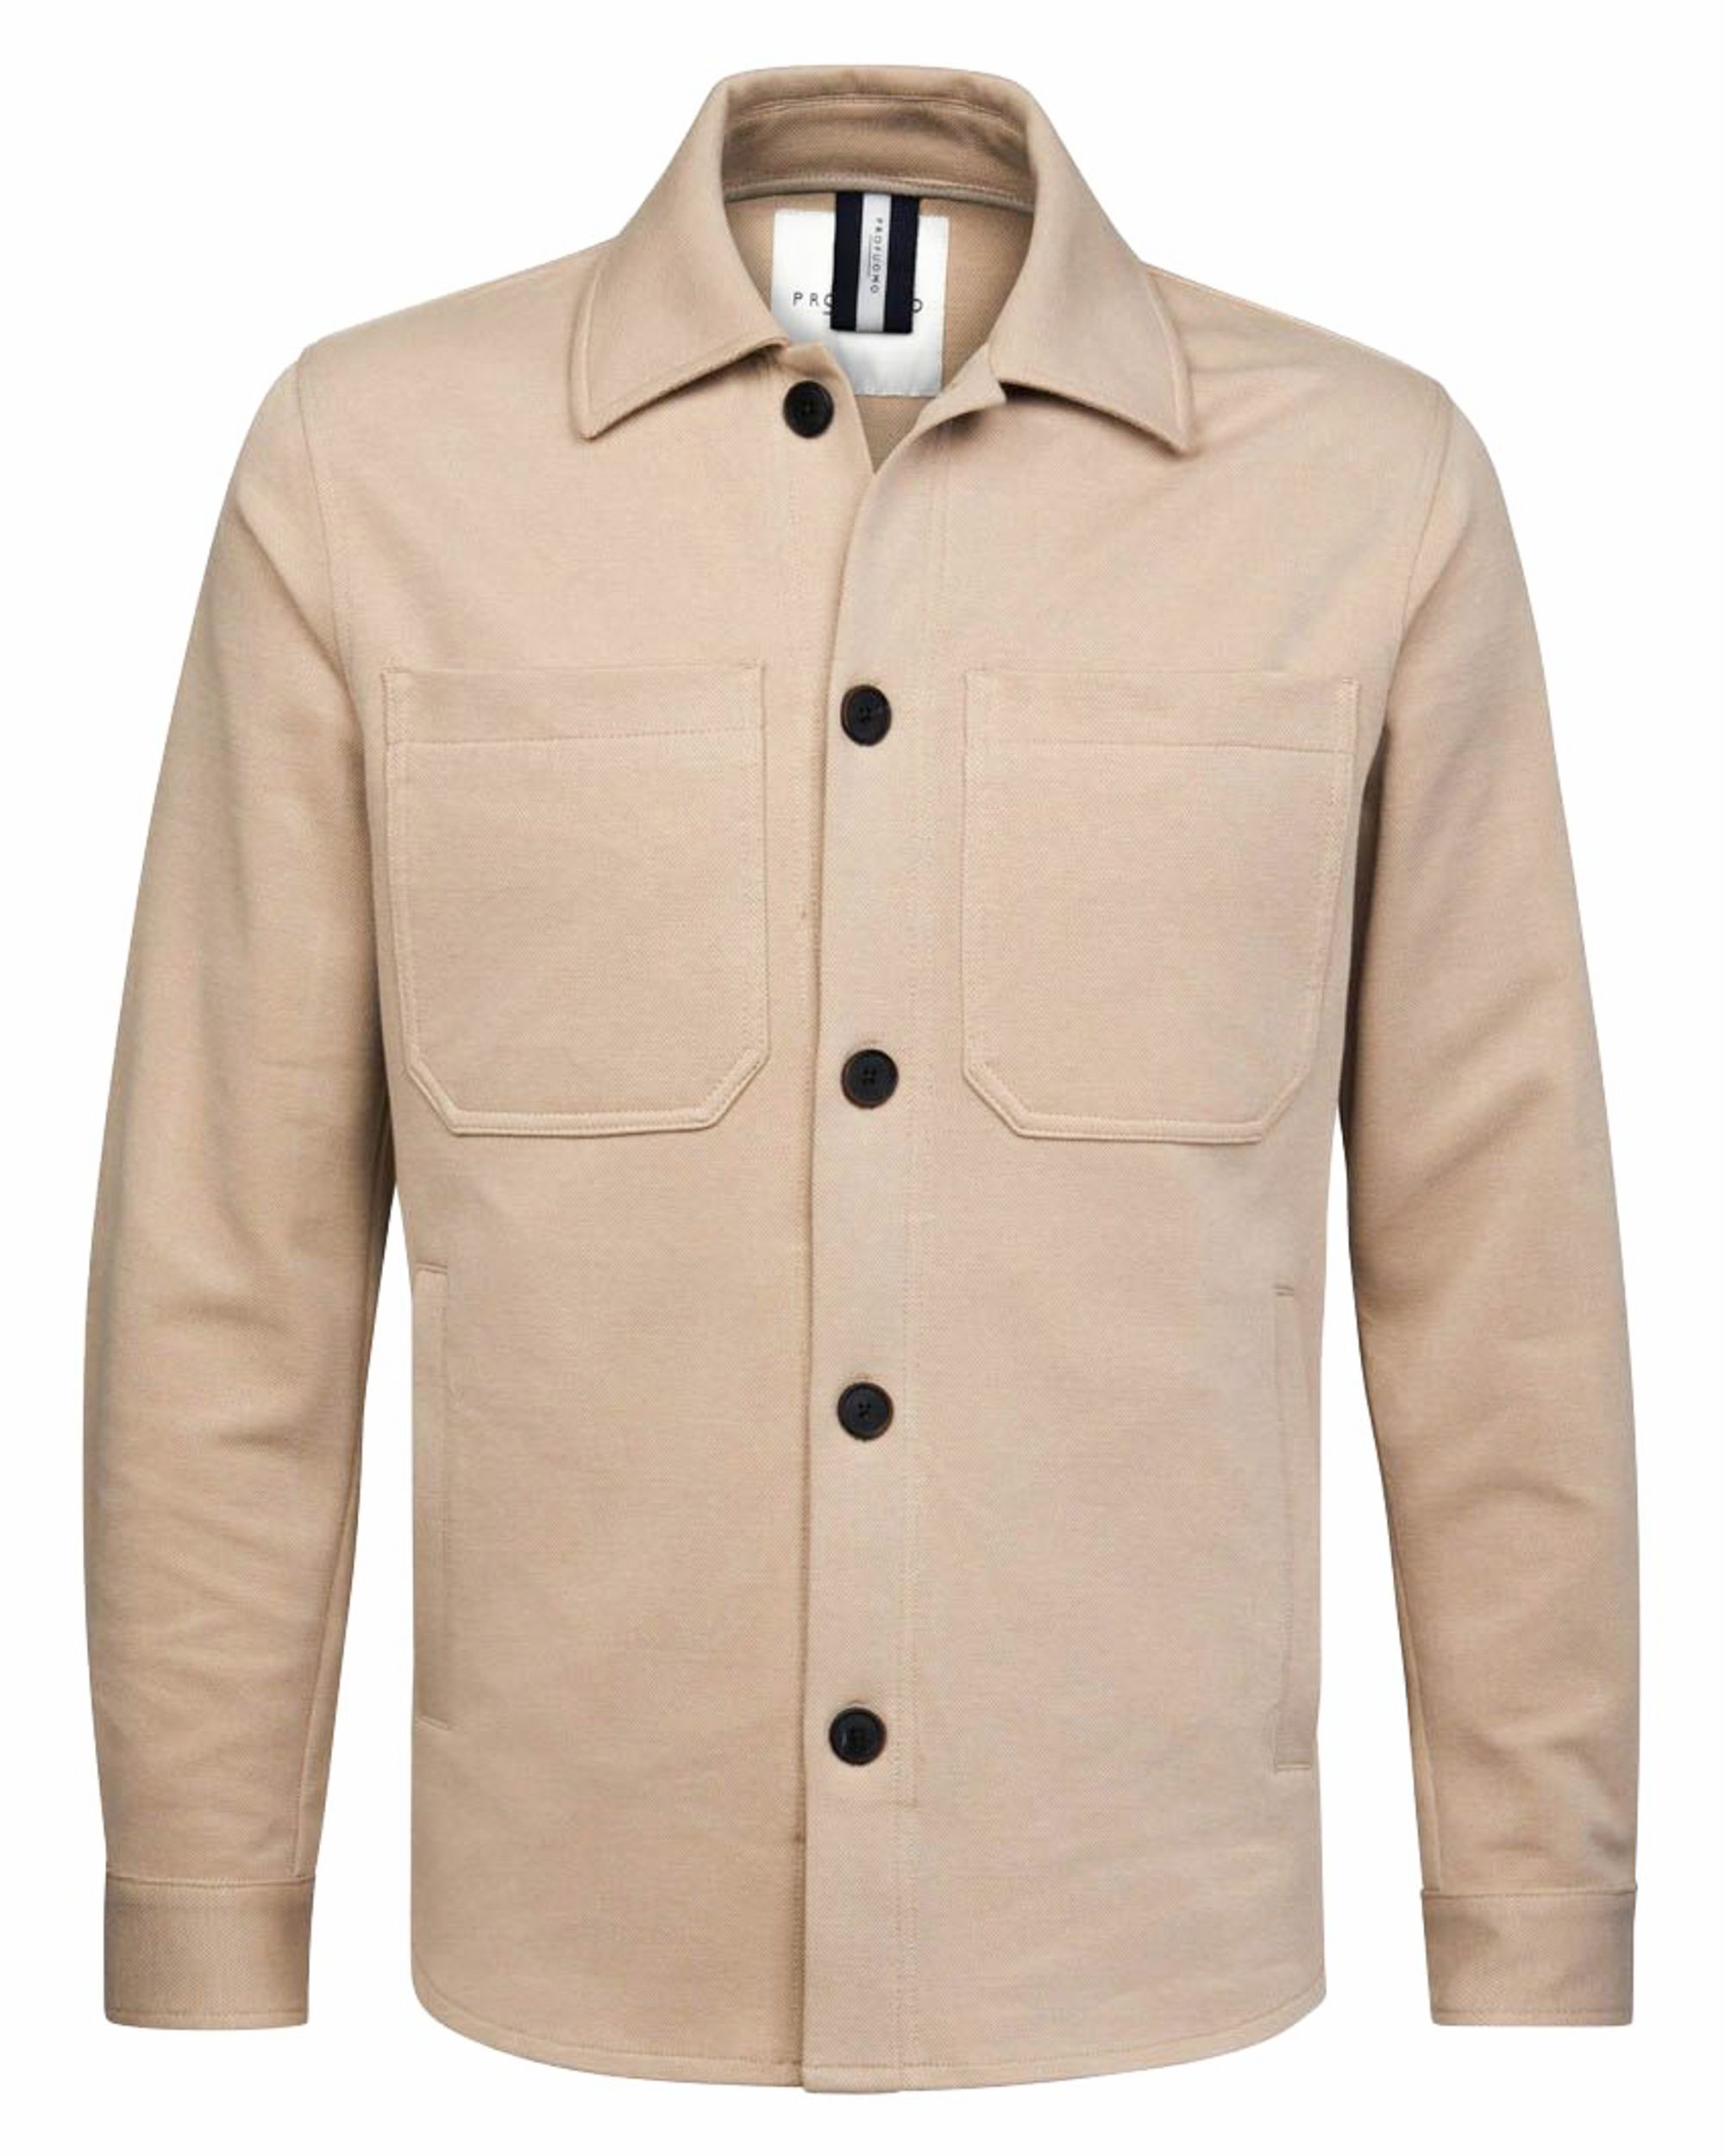 Profuomo Overshirt Donker rood 082910-001-L